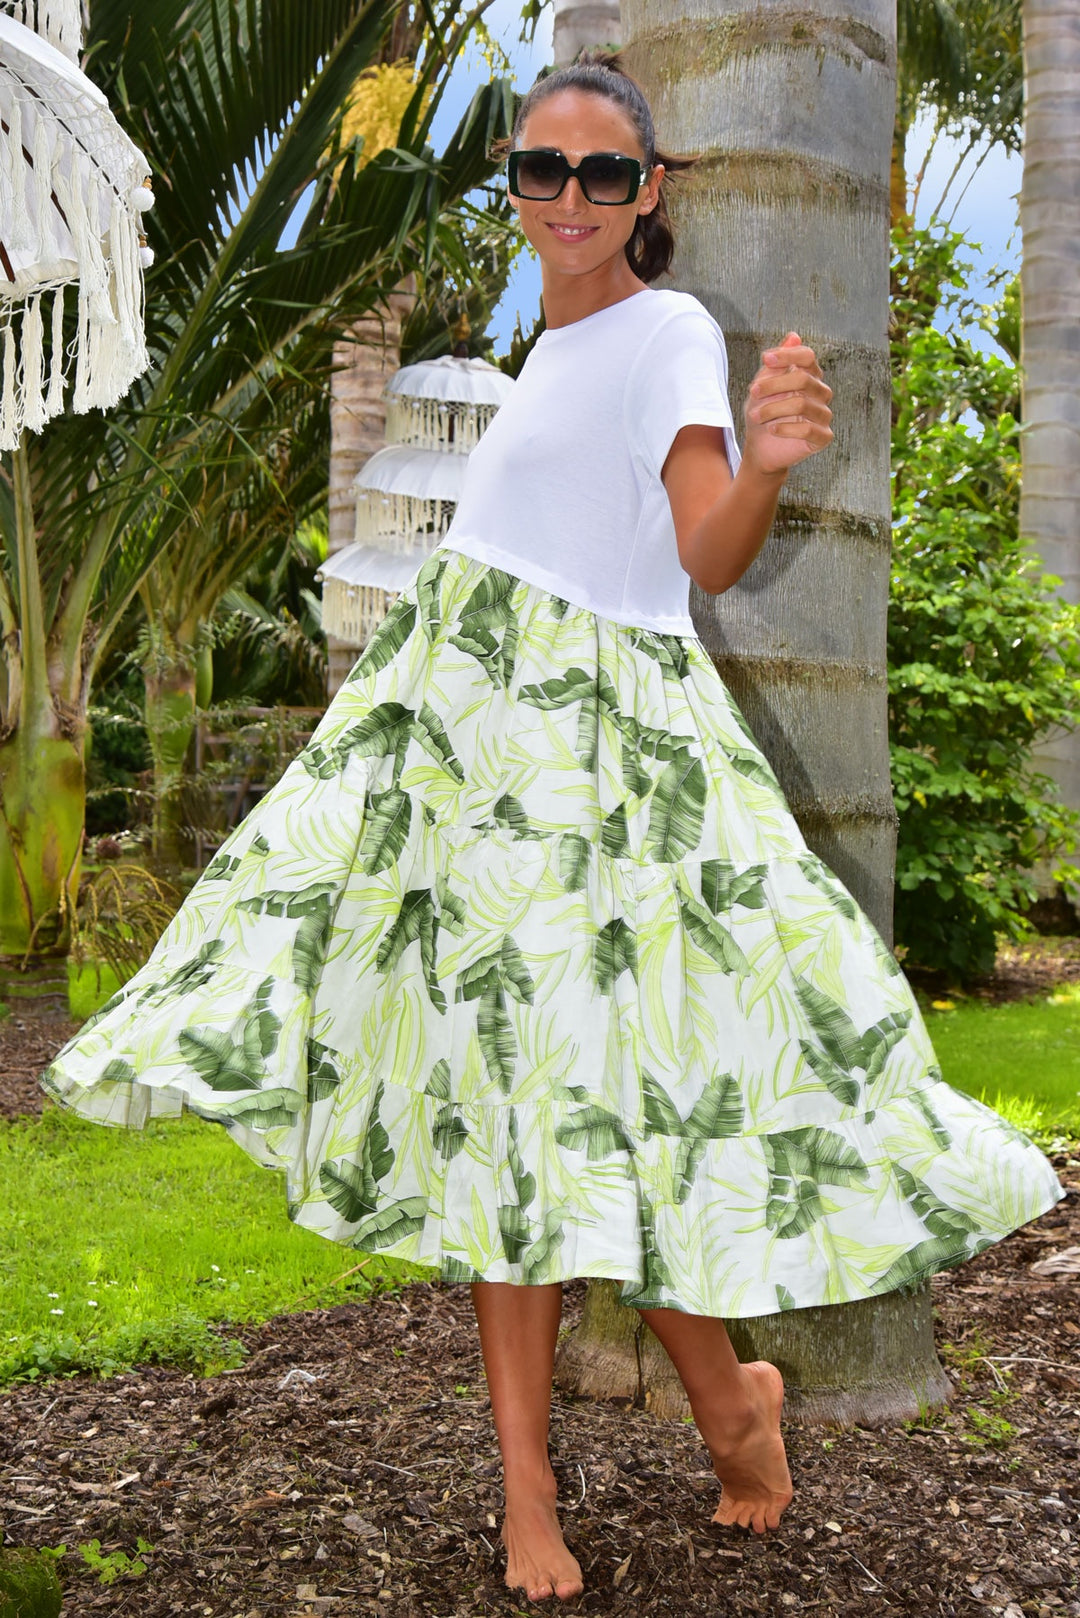 Take a Twirl dress by Curate (Trelise Cooper) dress Curate   